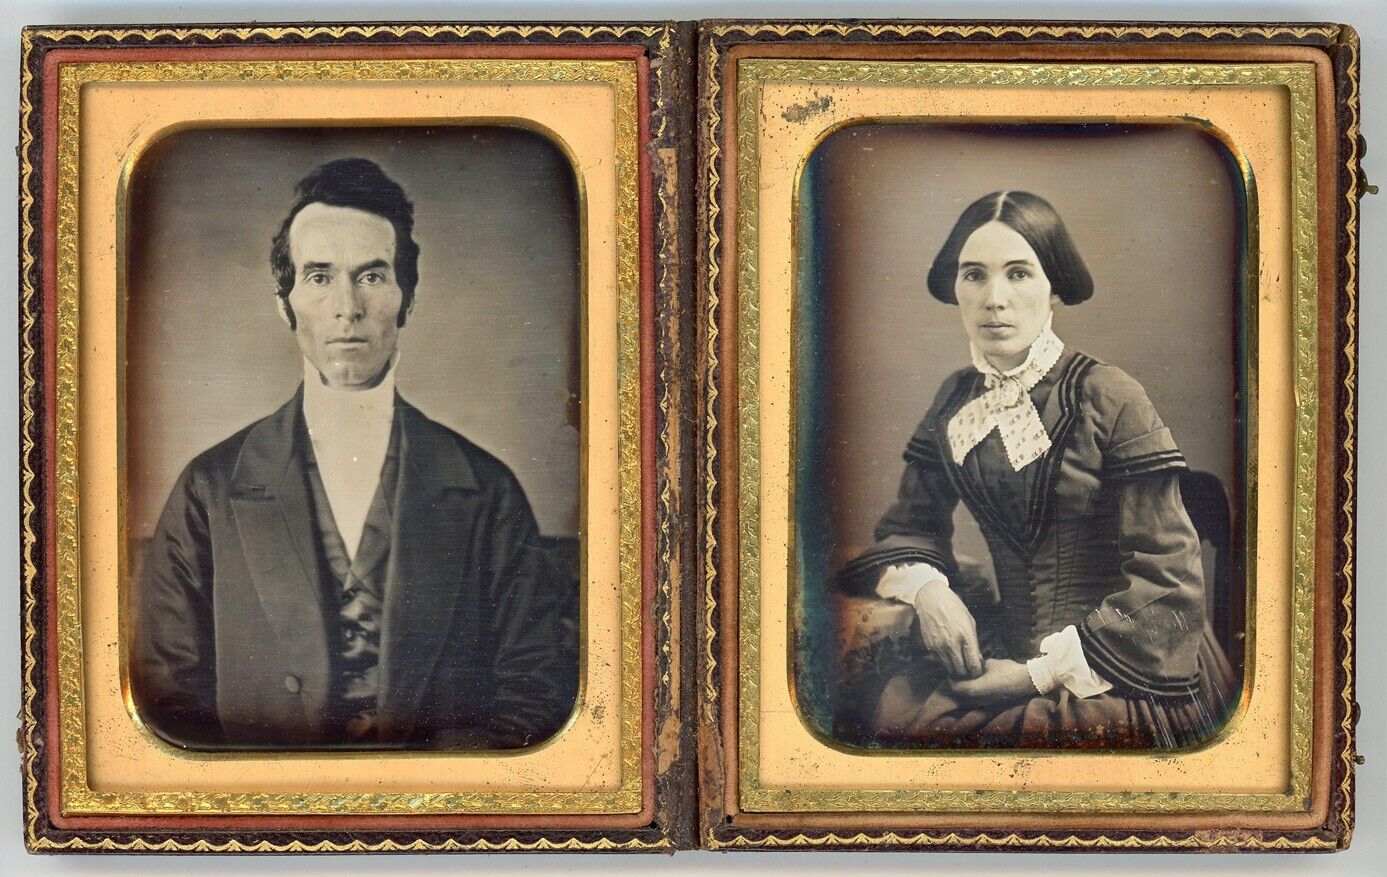 A VERY STUNNING COUPLE DAGUERREOTYPE PAIR IN DOUBLE CASE